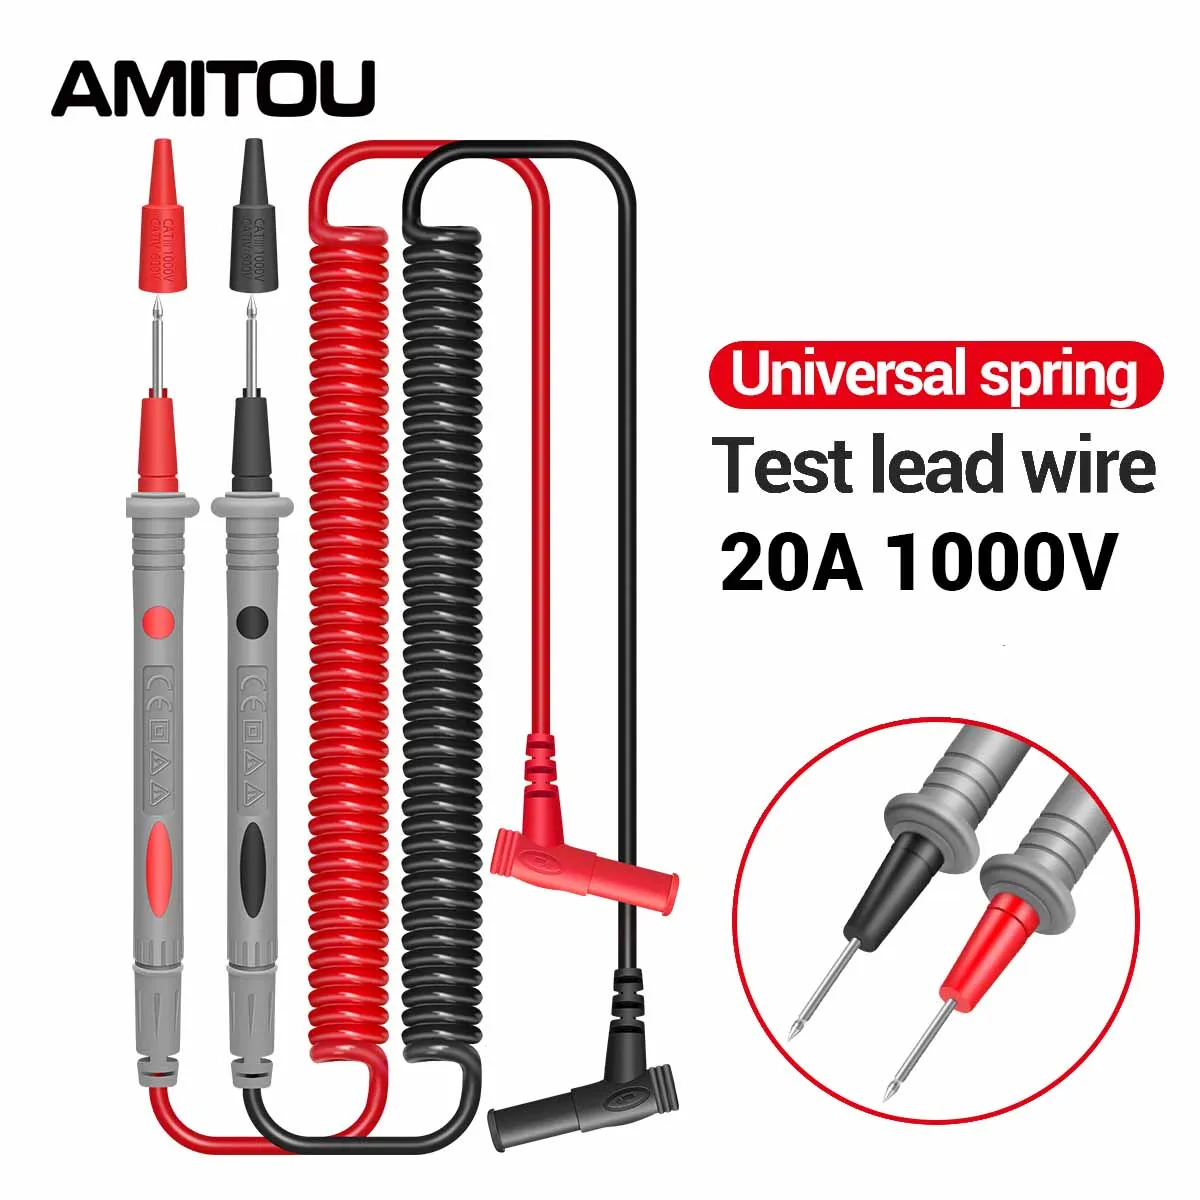 AMITOU Multimeter Probe Test Leads 20A Universal Spring Cable Tester Lead Measuring Wire Pen for Multi-Meter Tester Wire Tips